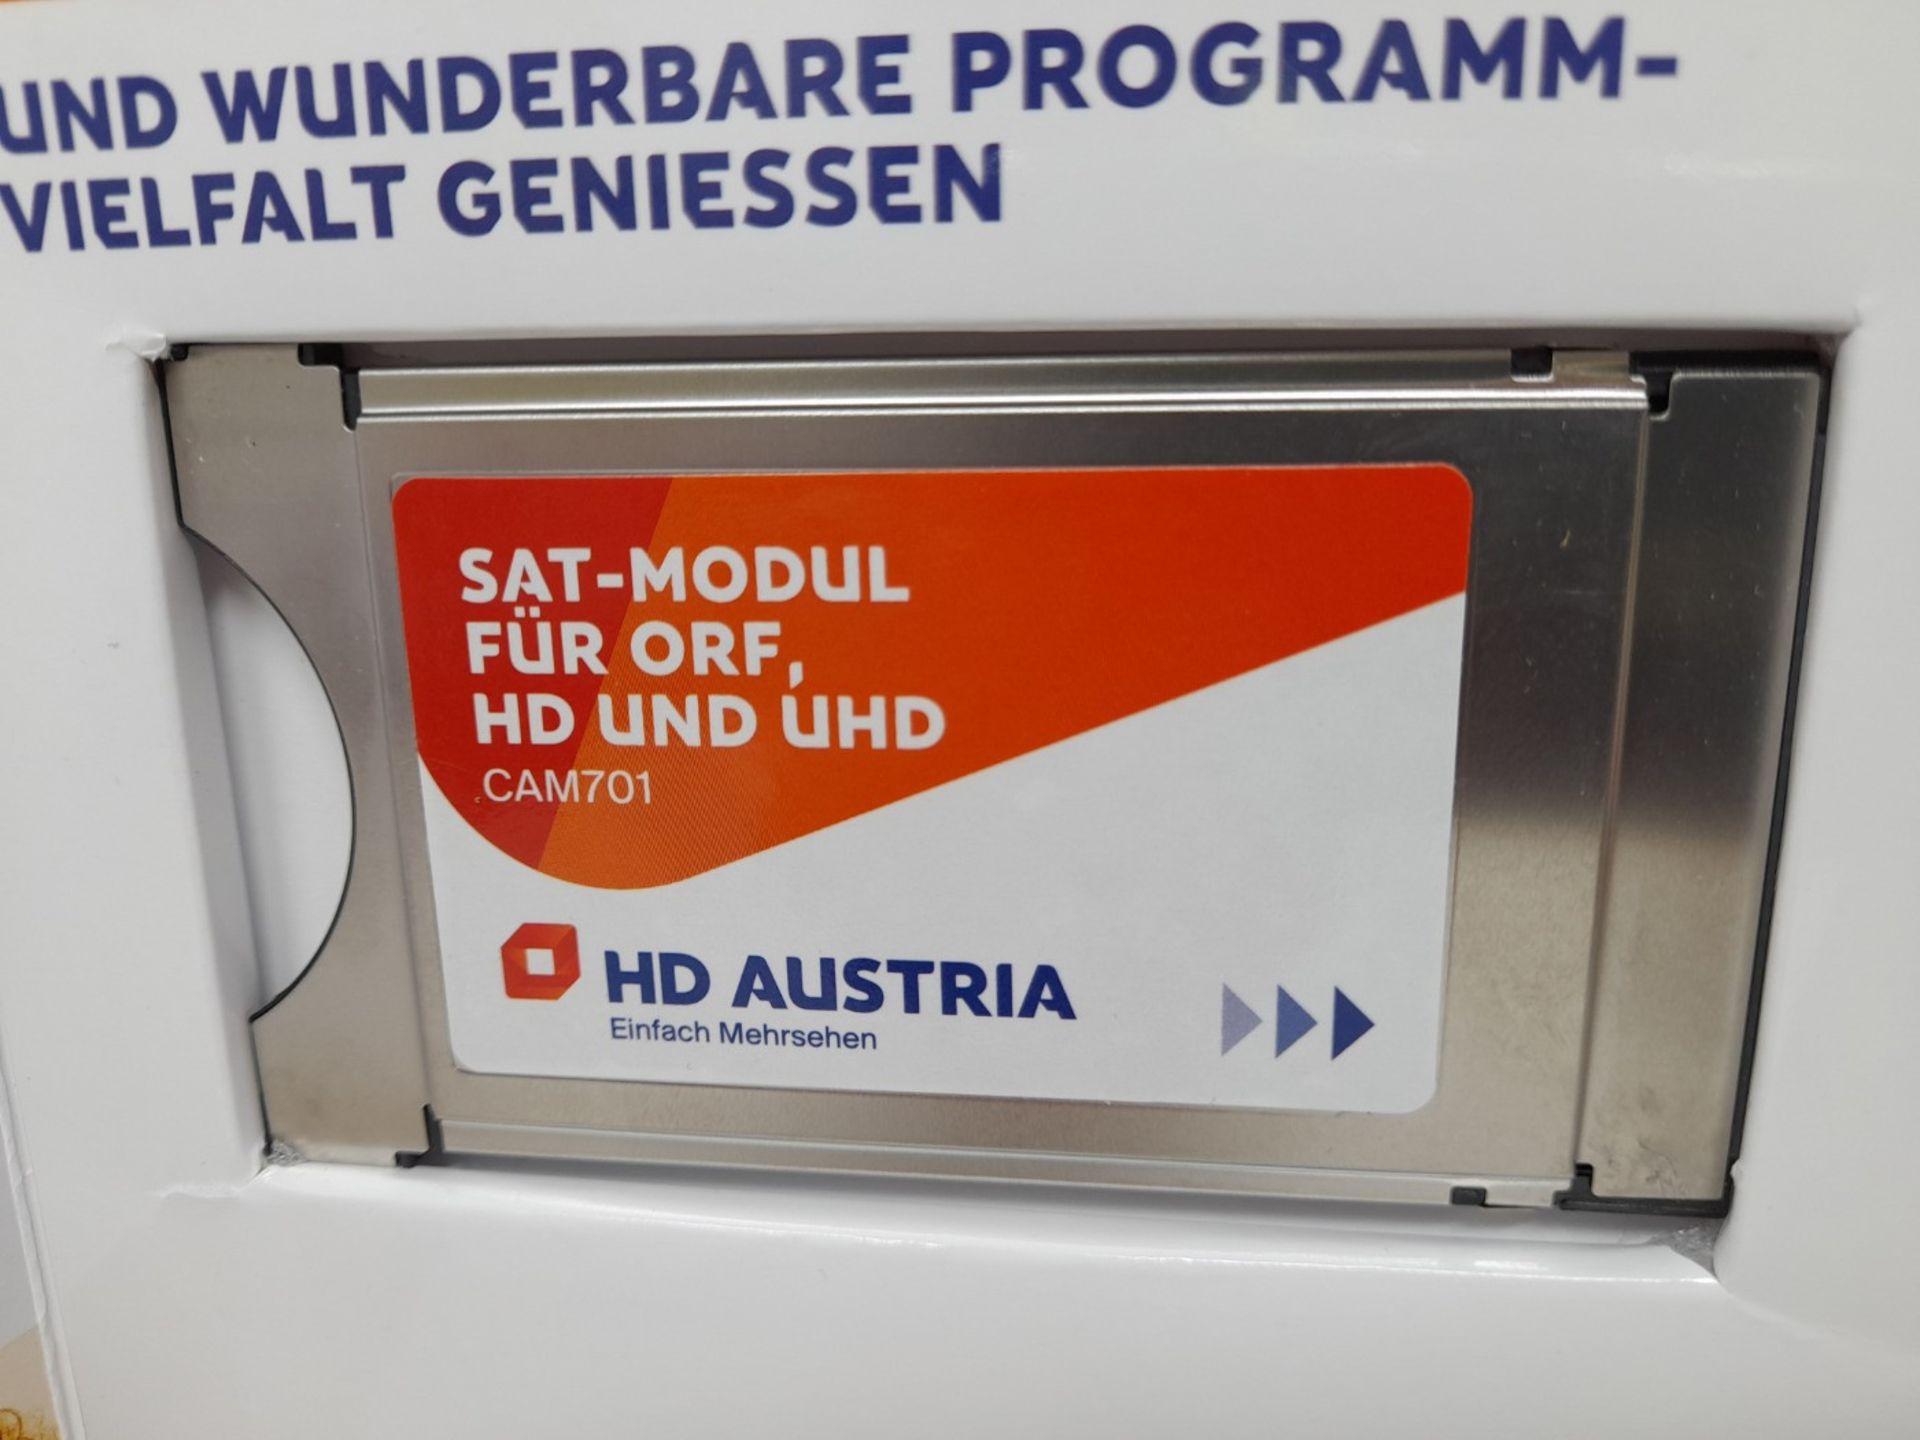 RRP £62.00 HD Austria SAT module for ORF, HD and UHD - Image 3 of 3